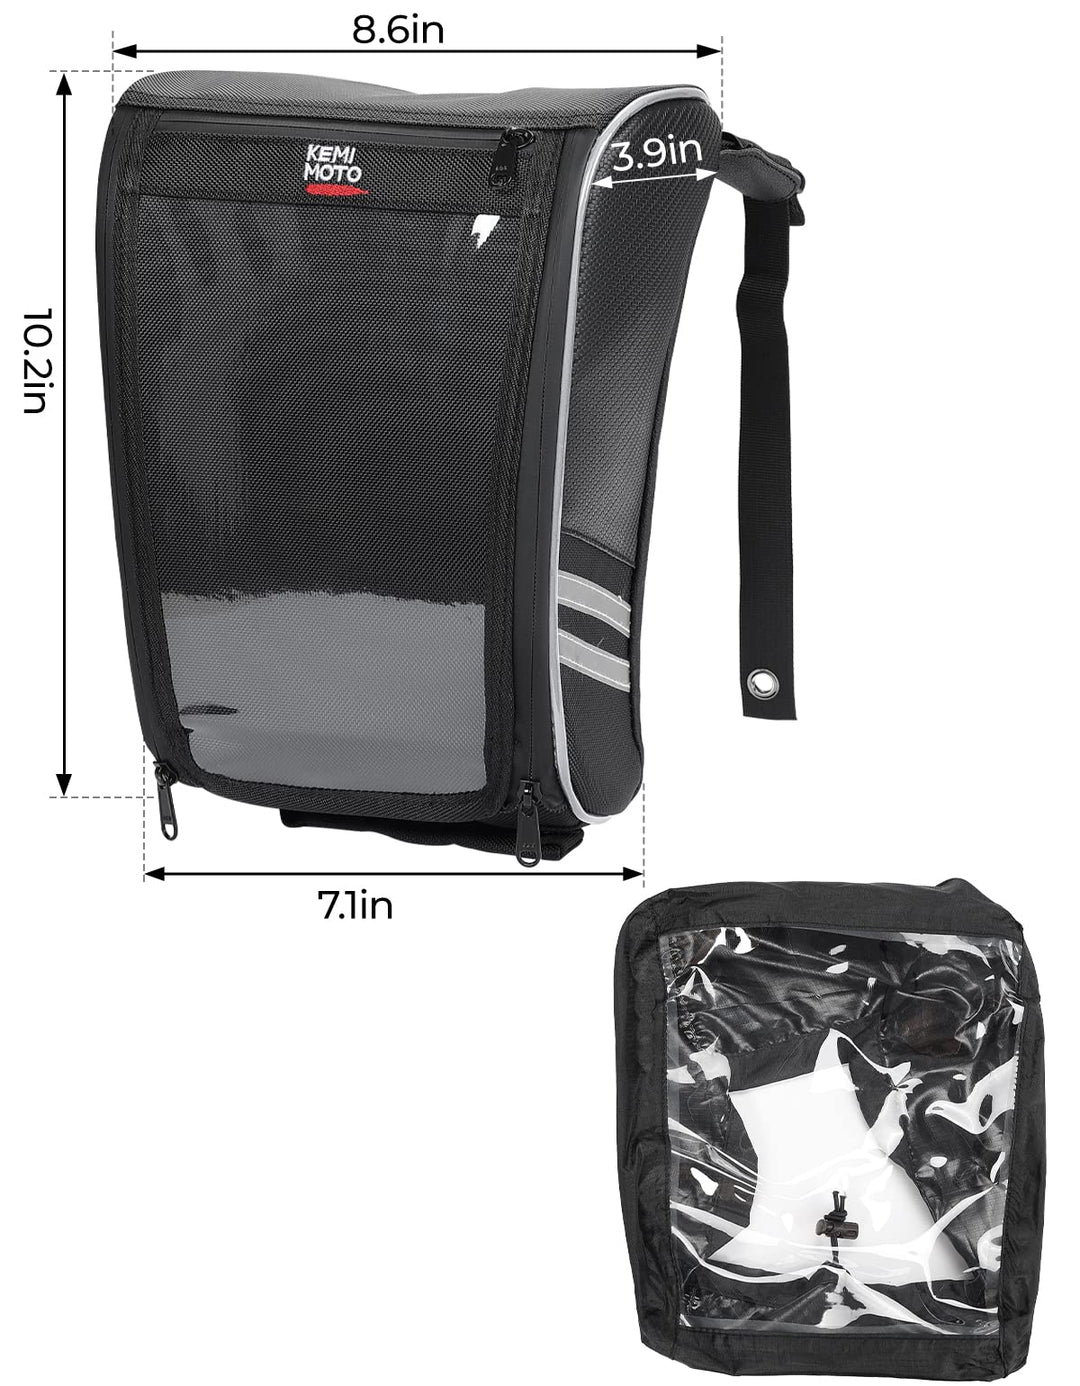 Motorcycle Tank Bag with Waterproof Cover for Sportster XL - Kemimoto